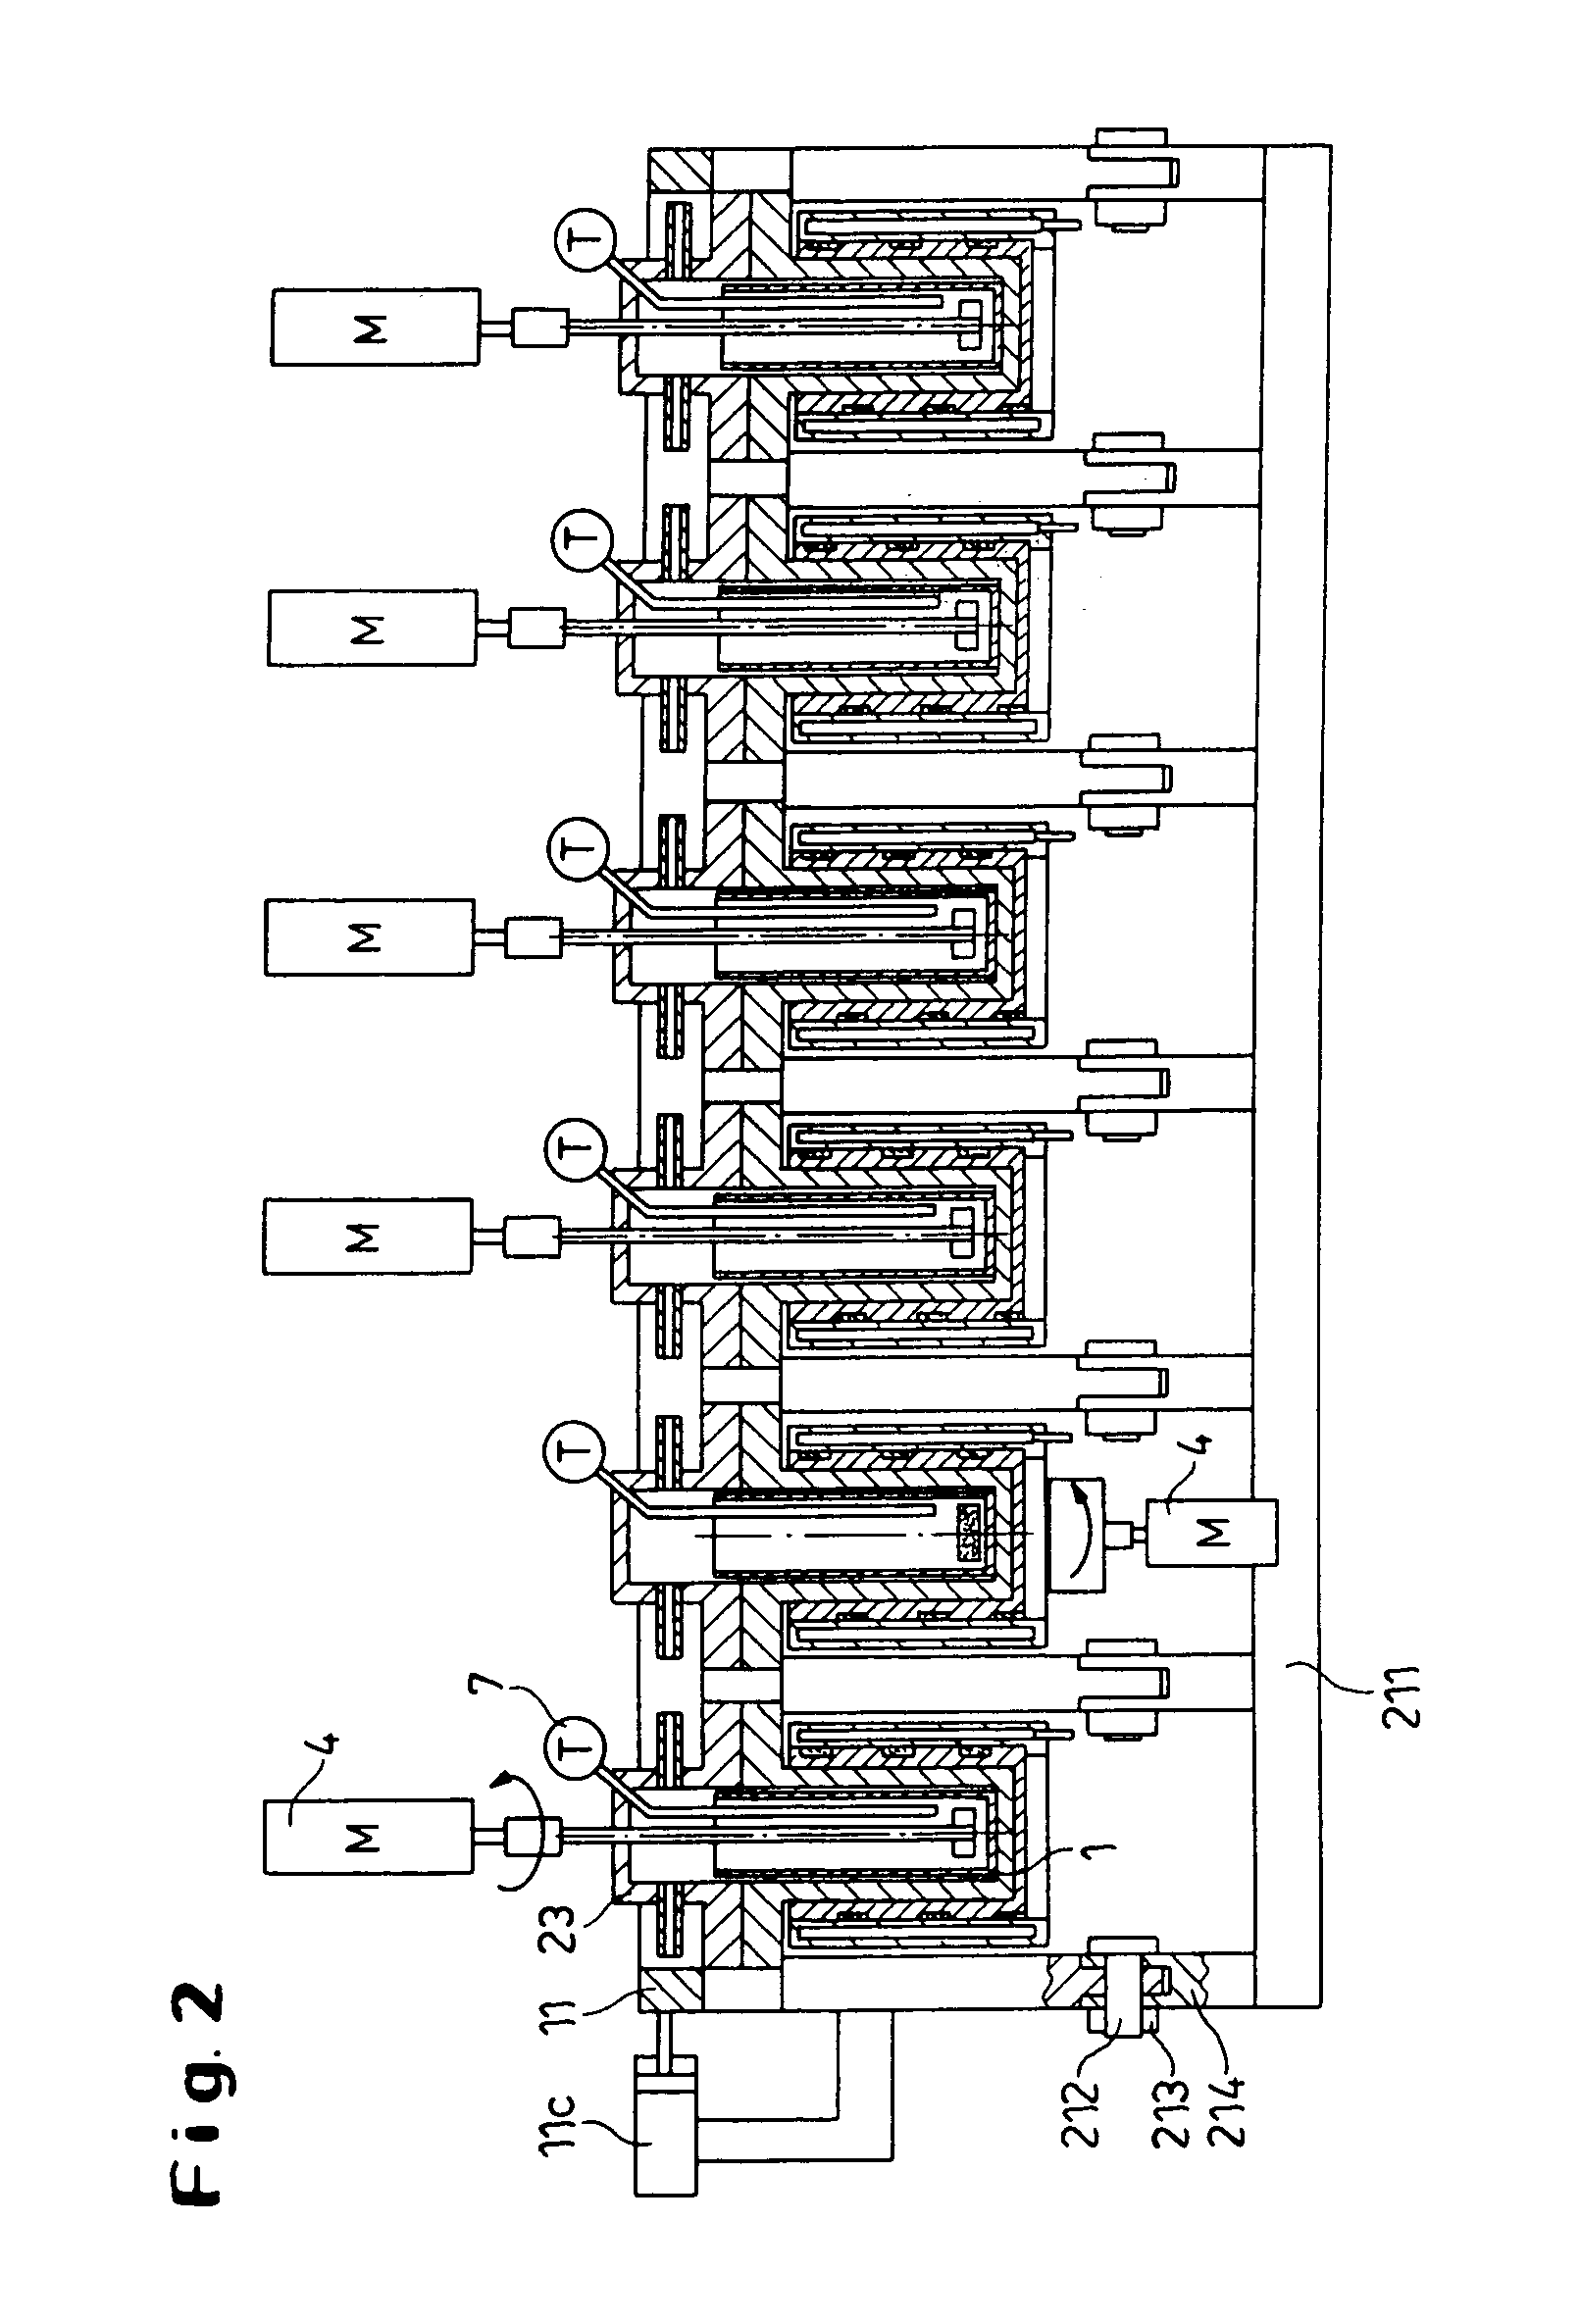 Device and method for carrying out experiments in parallel